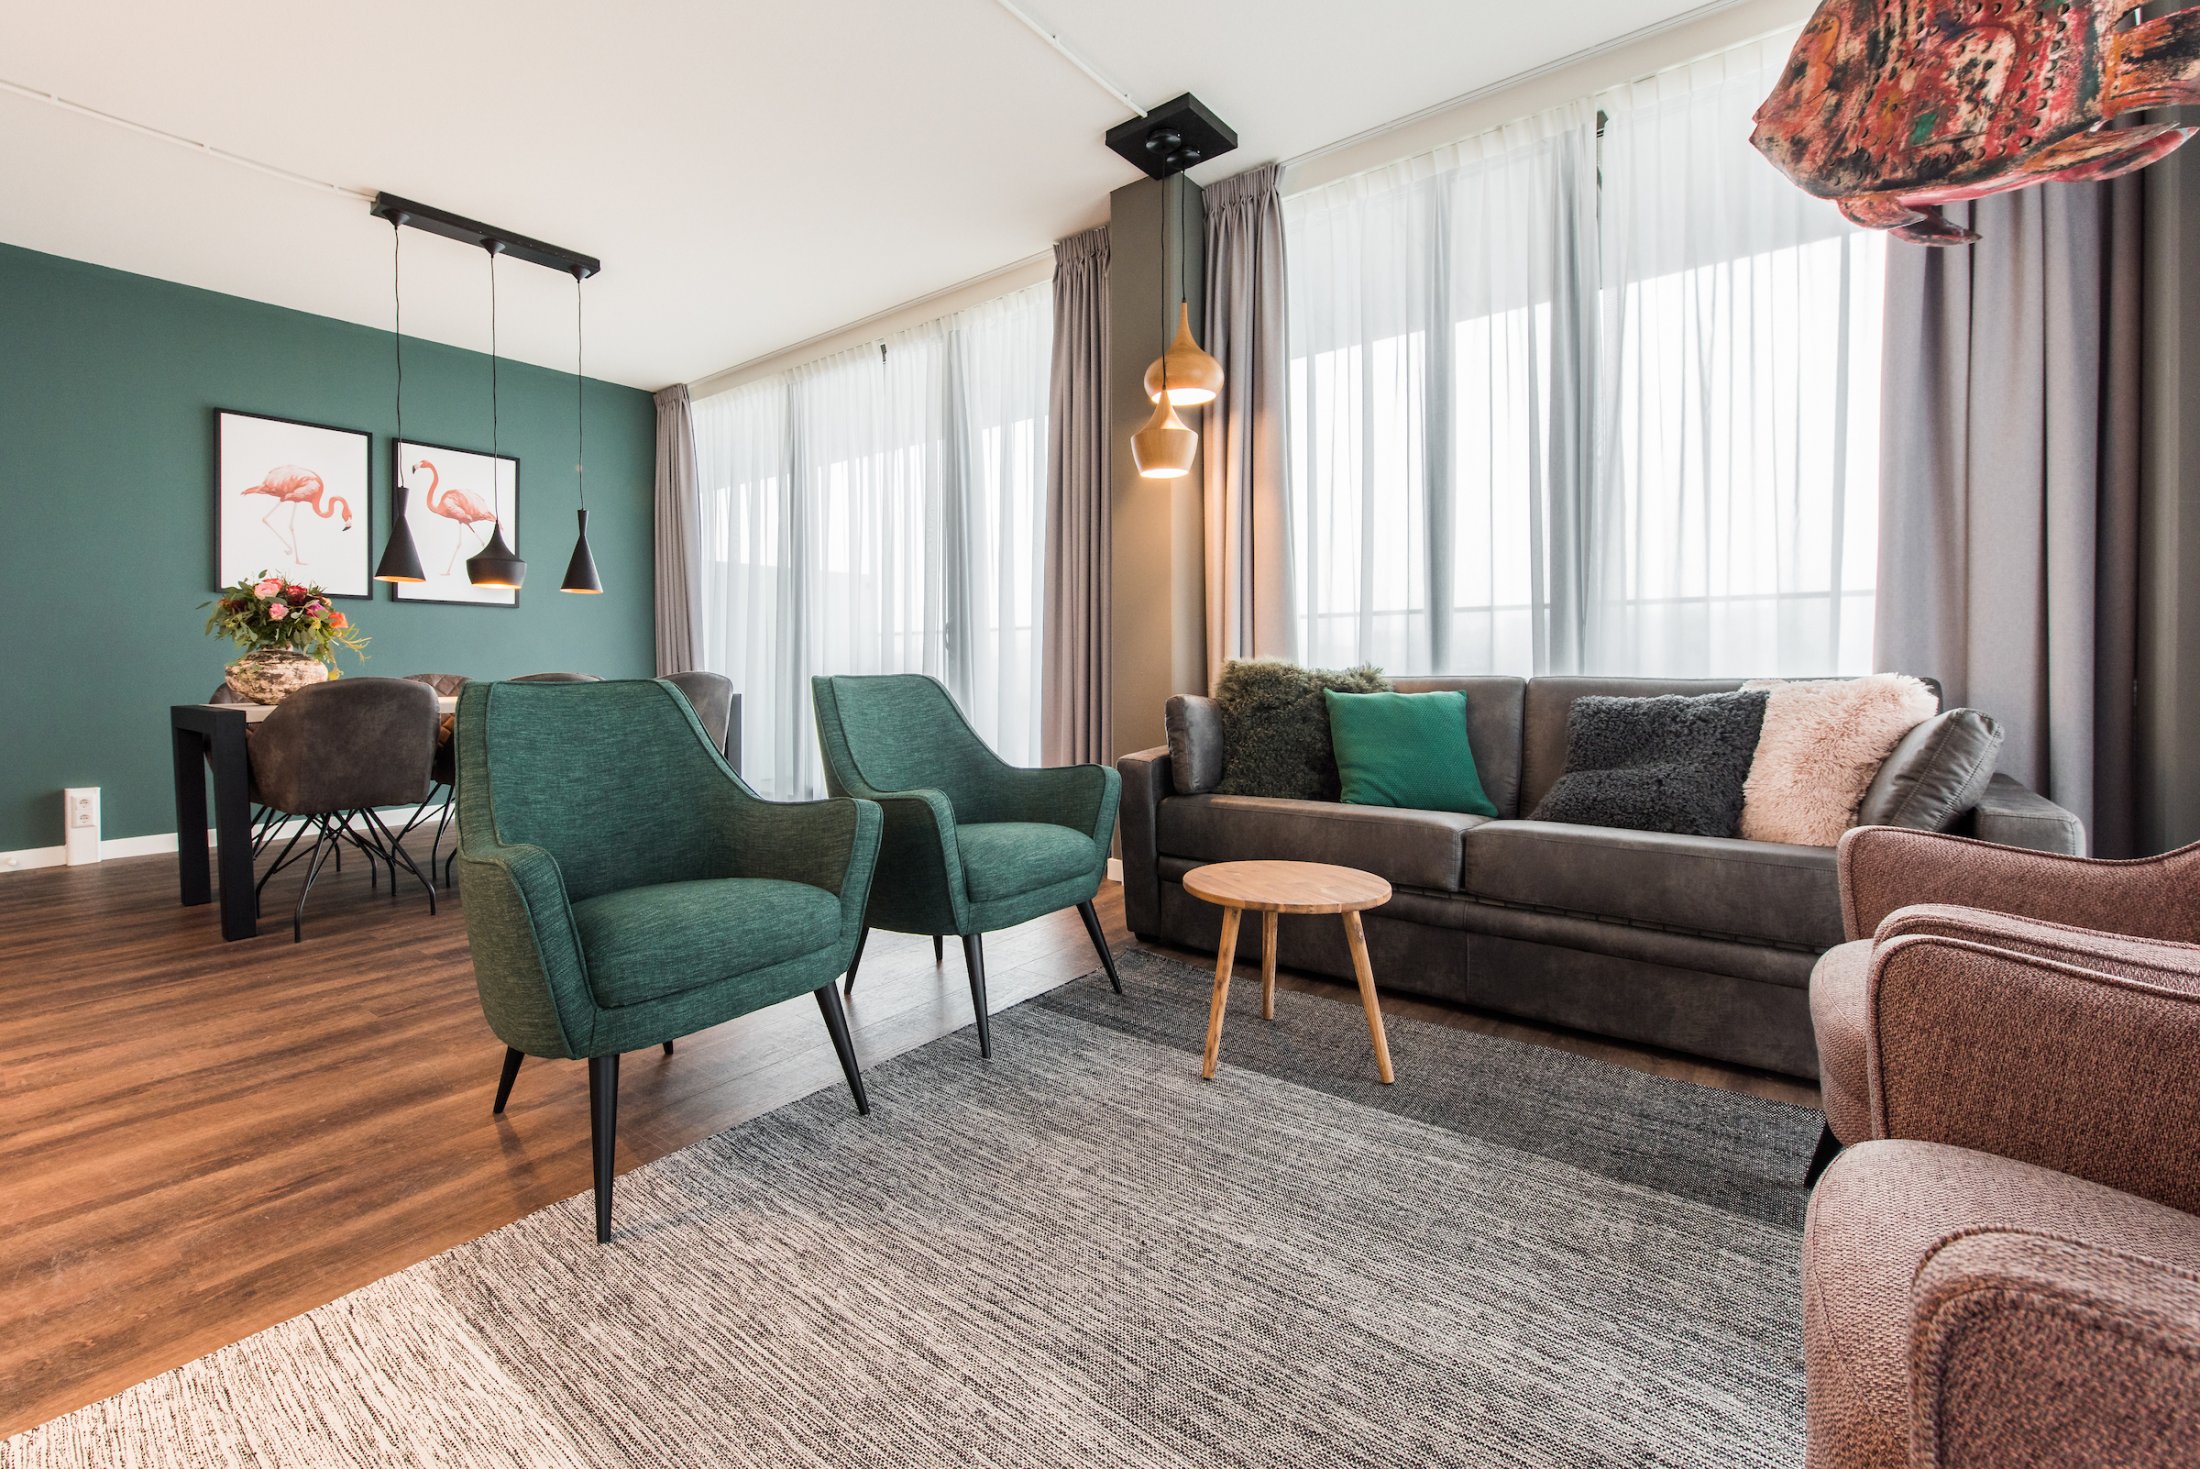 NDSM Serviced Apartments AMS Large Two bedroom living